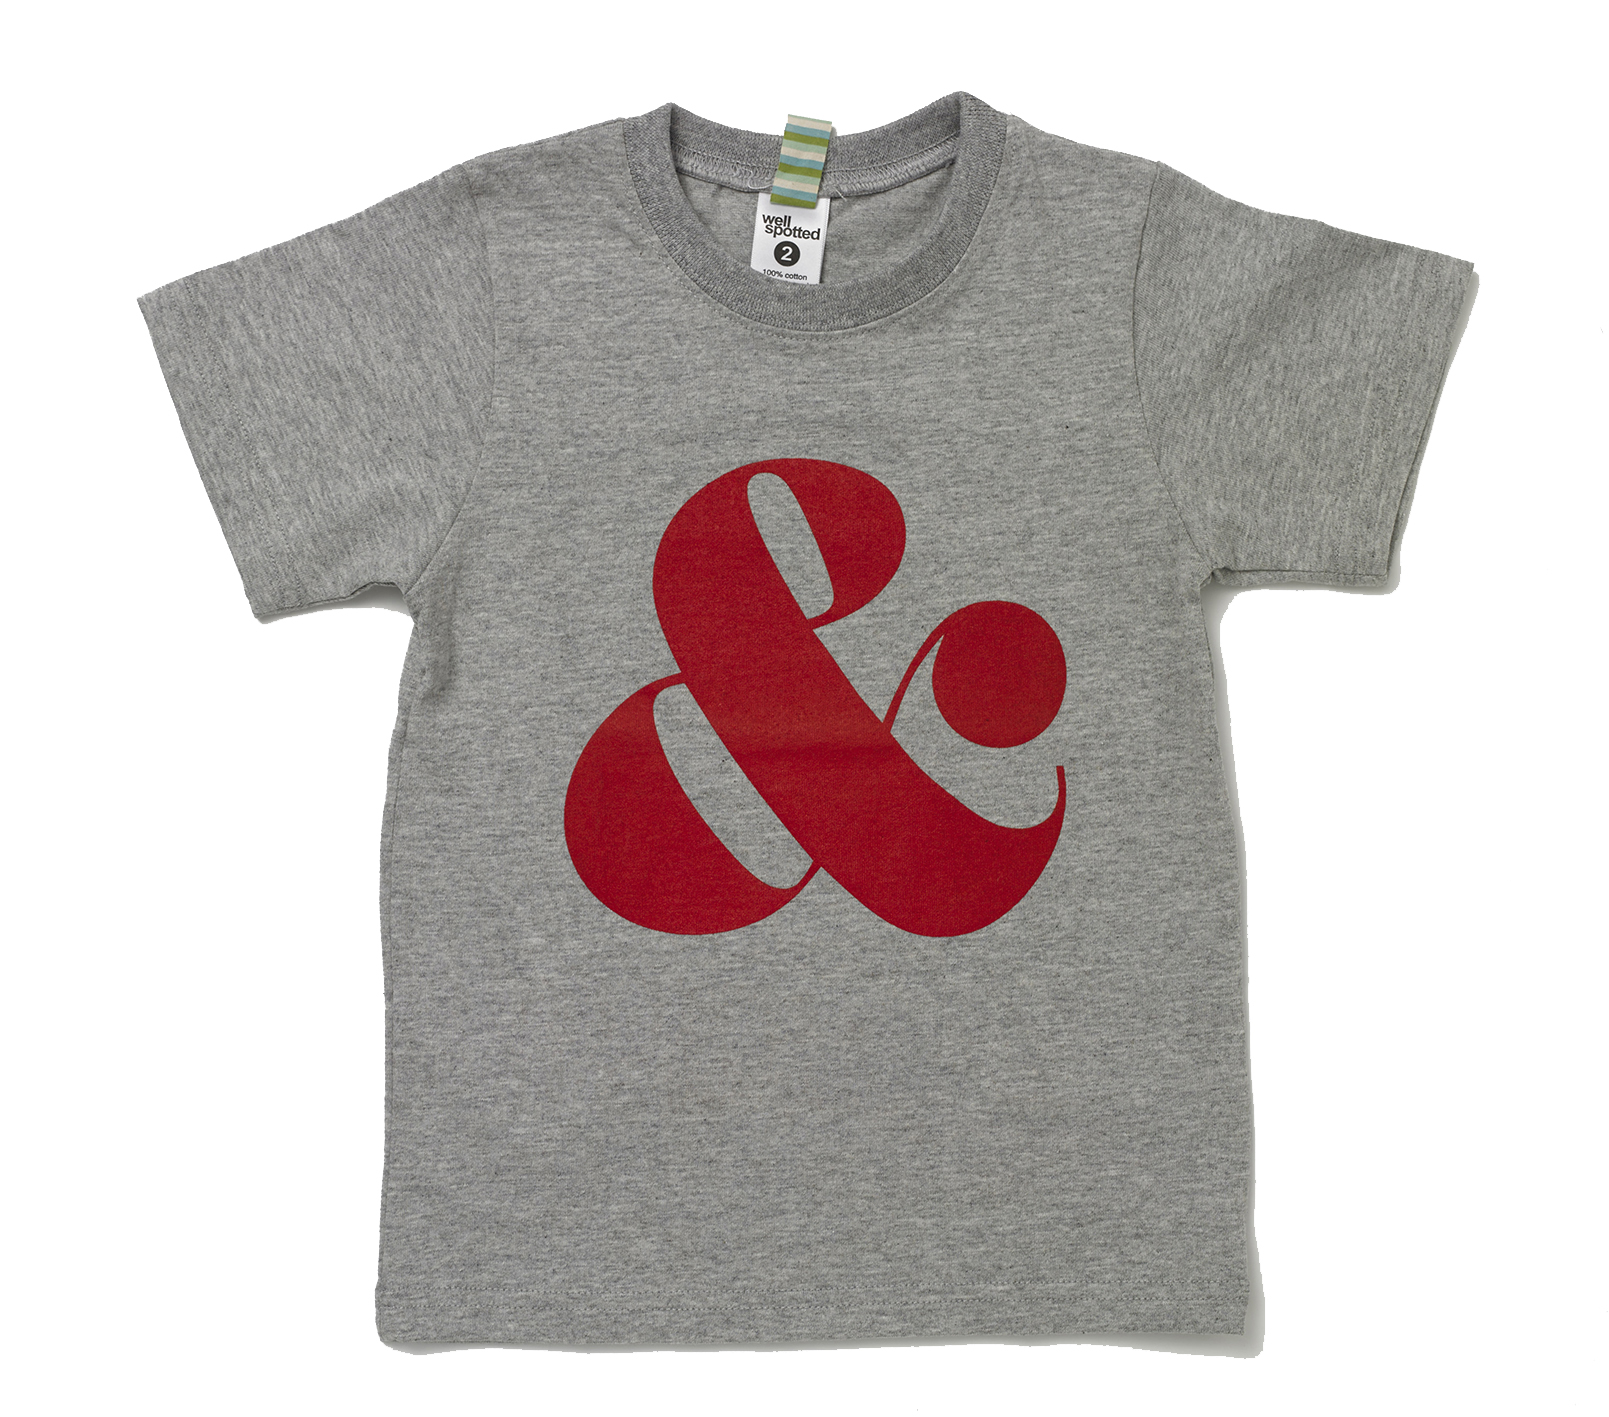 Kids Tees — Well Spotted